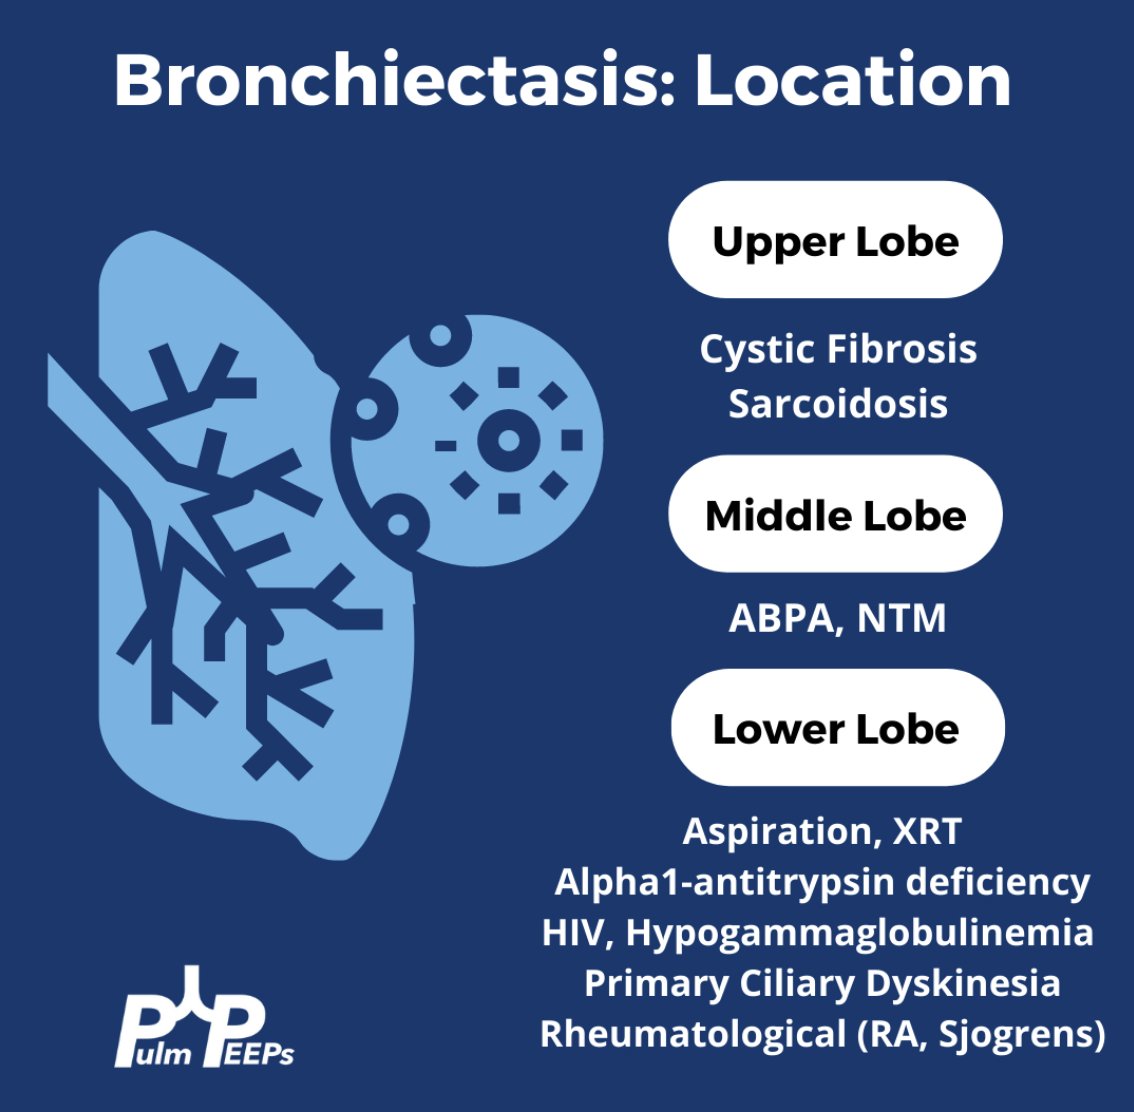 Given upper lobe bronchiectasis you are concerned for cystic fibrosis. A sweat chloride test is obtained and was elevated suggesting CF and further genetic testing was sent to confirm the diagnosis.